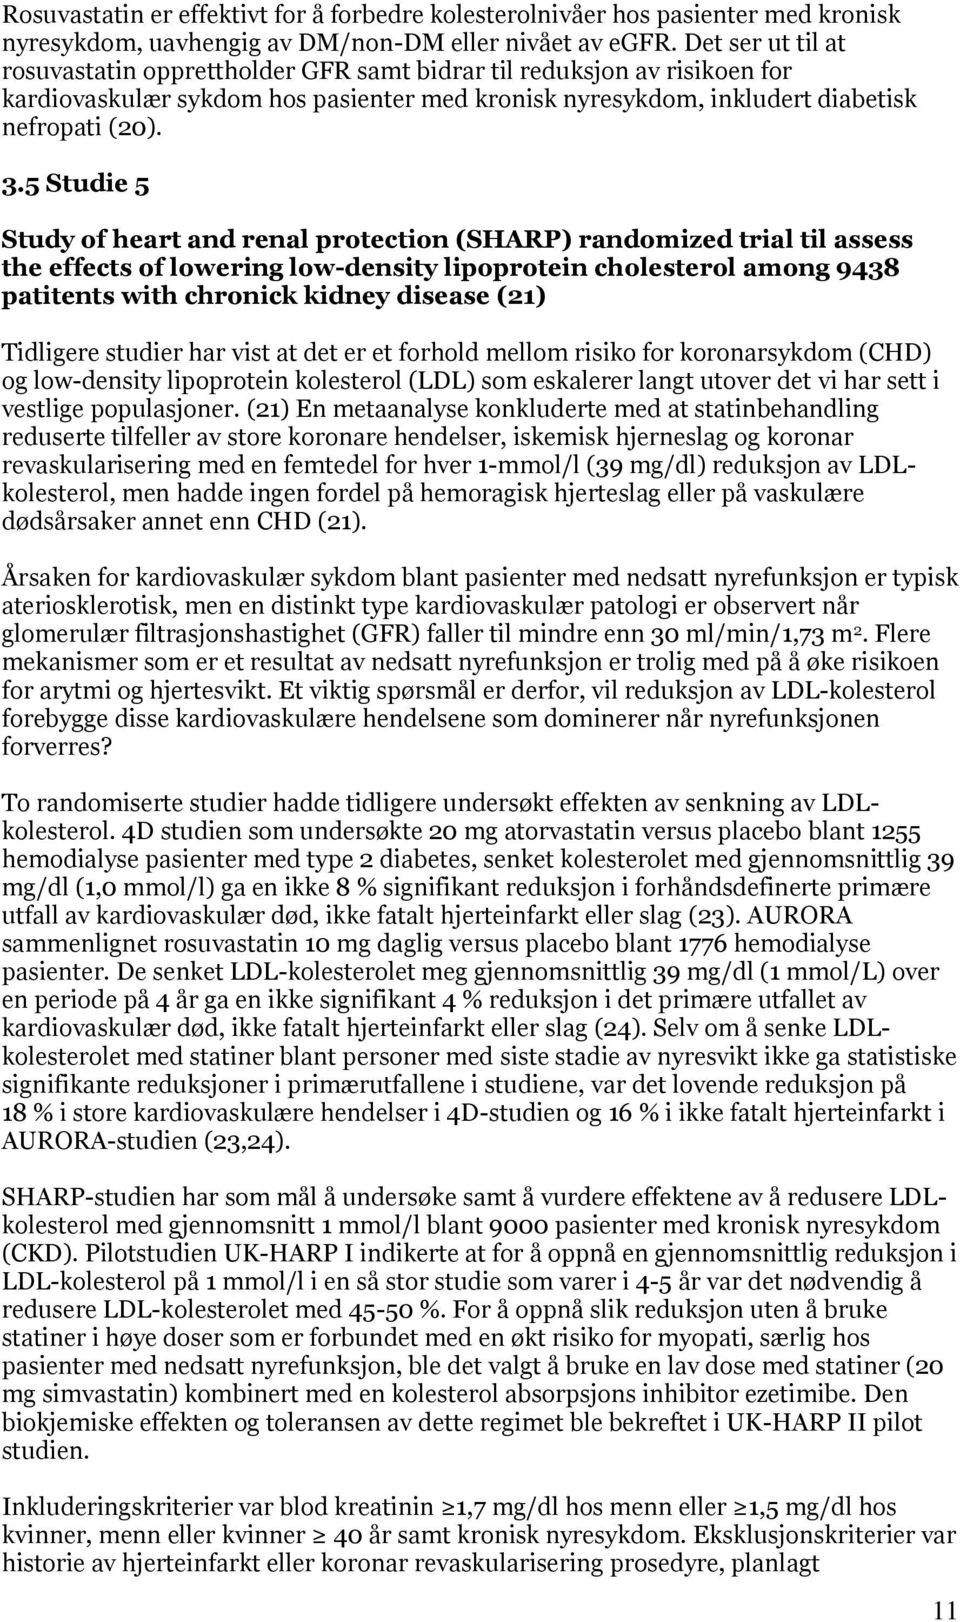 5 Studie 5 Study of heart and renal protection (SHARP) randomized trial til assess the effects of lowering low-density lipoprotein cholesterol among 9438 patitents with chronick kidney disease (21)